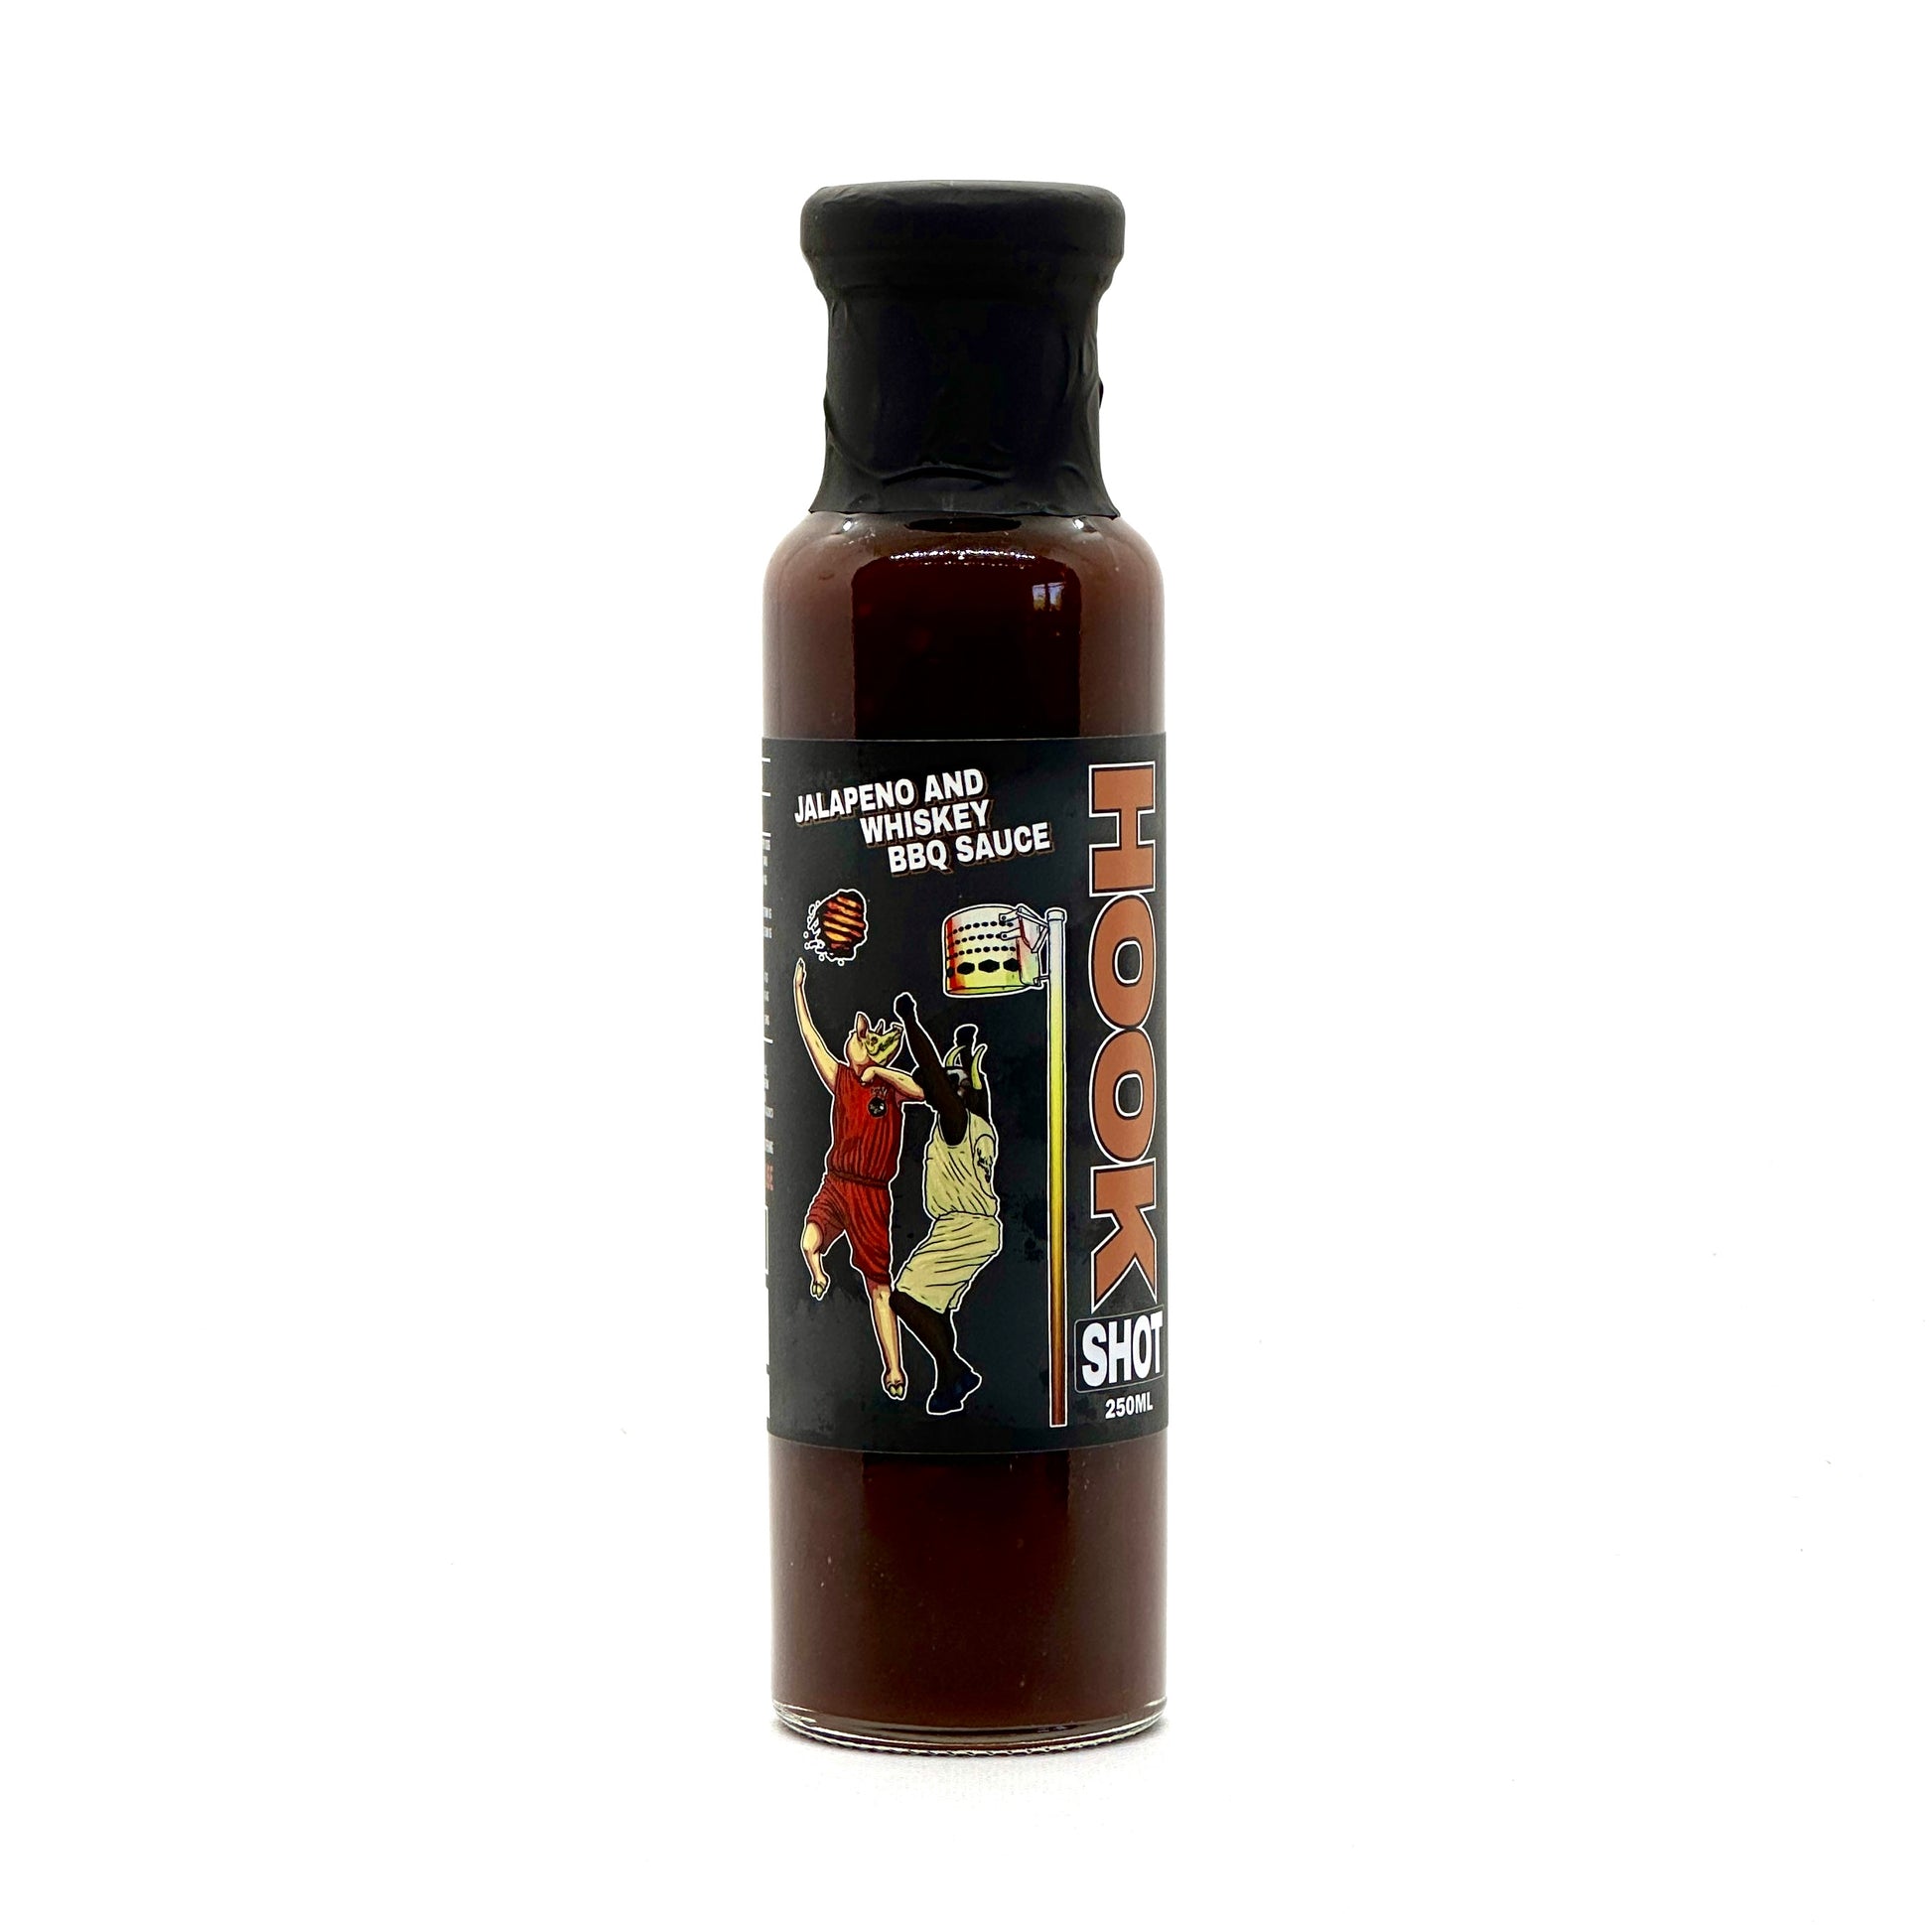 Bottle of Low 'n' Slow Basics Hook Shot Jalapeno and Whiskey BBQ Sauce displayed against a rustic background, highlighting its premium branding and flavor cues